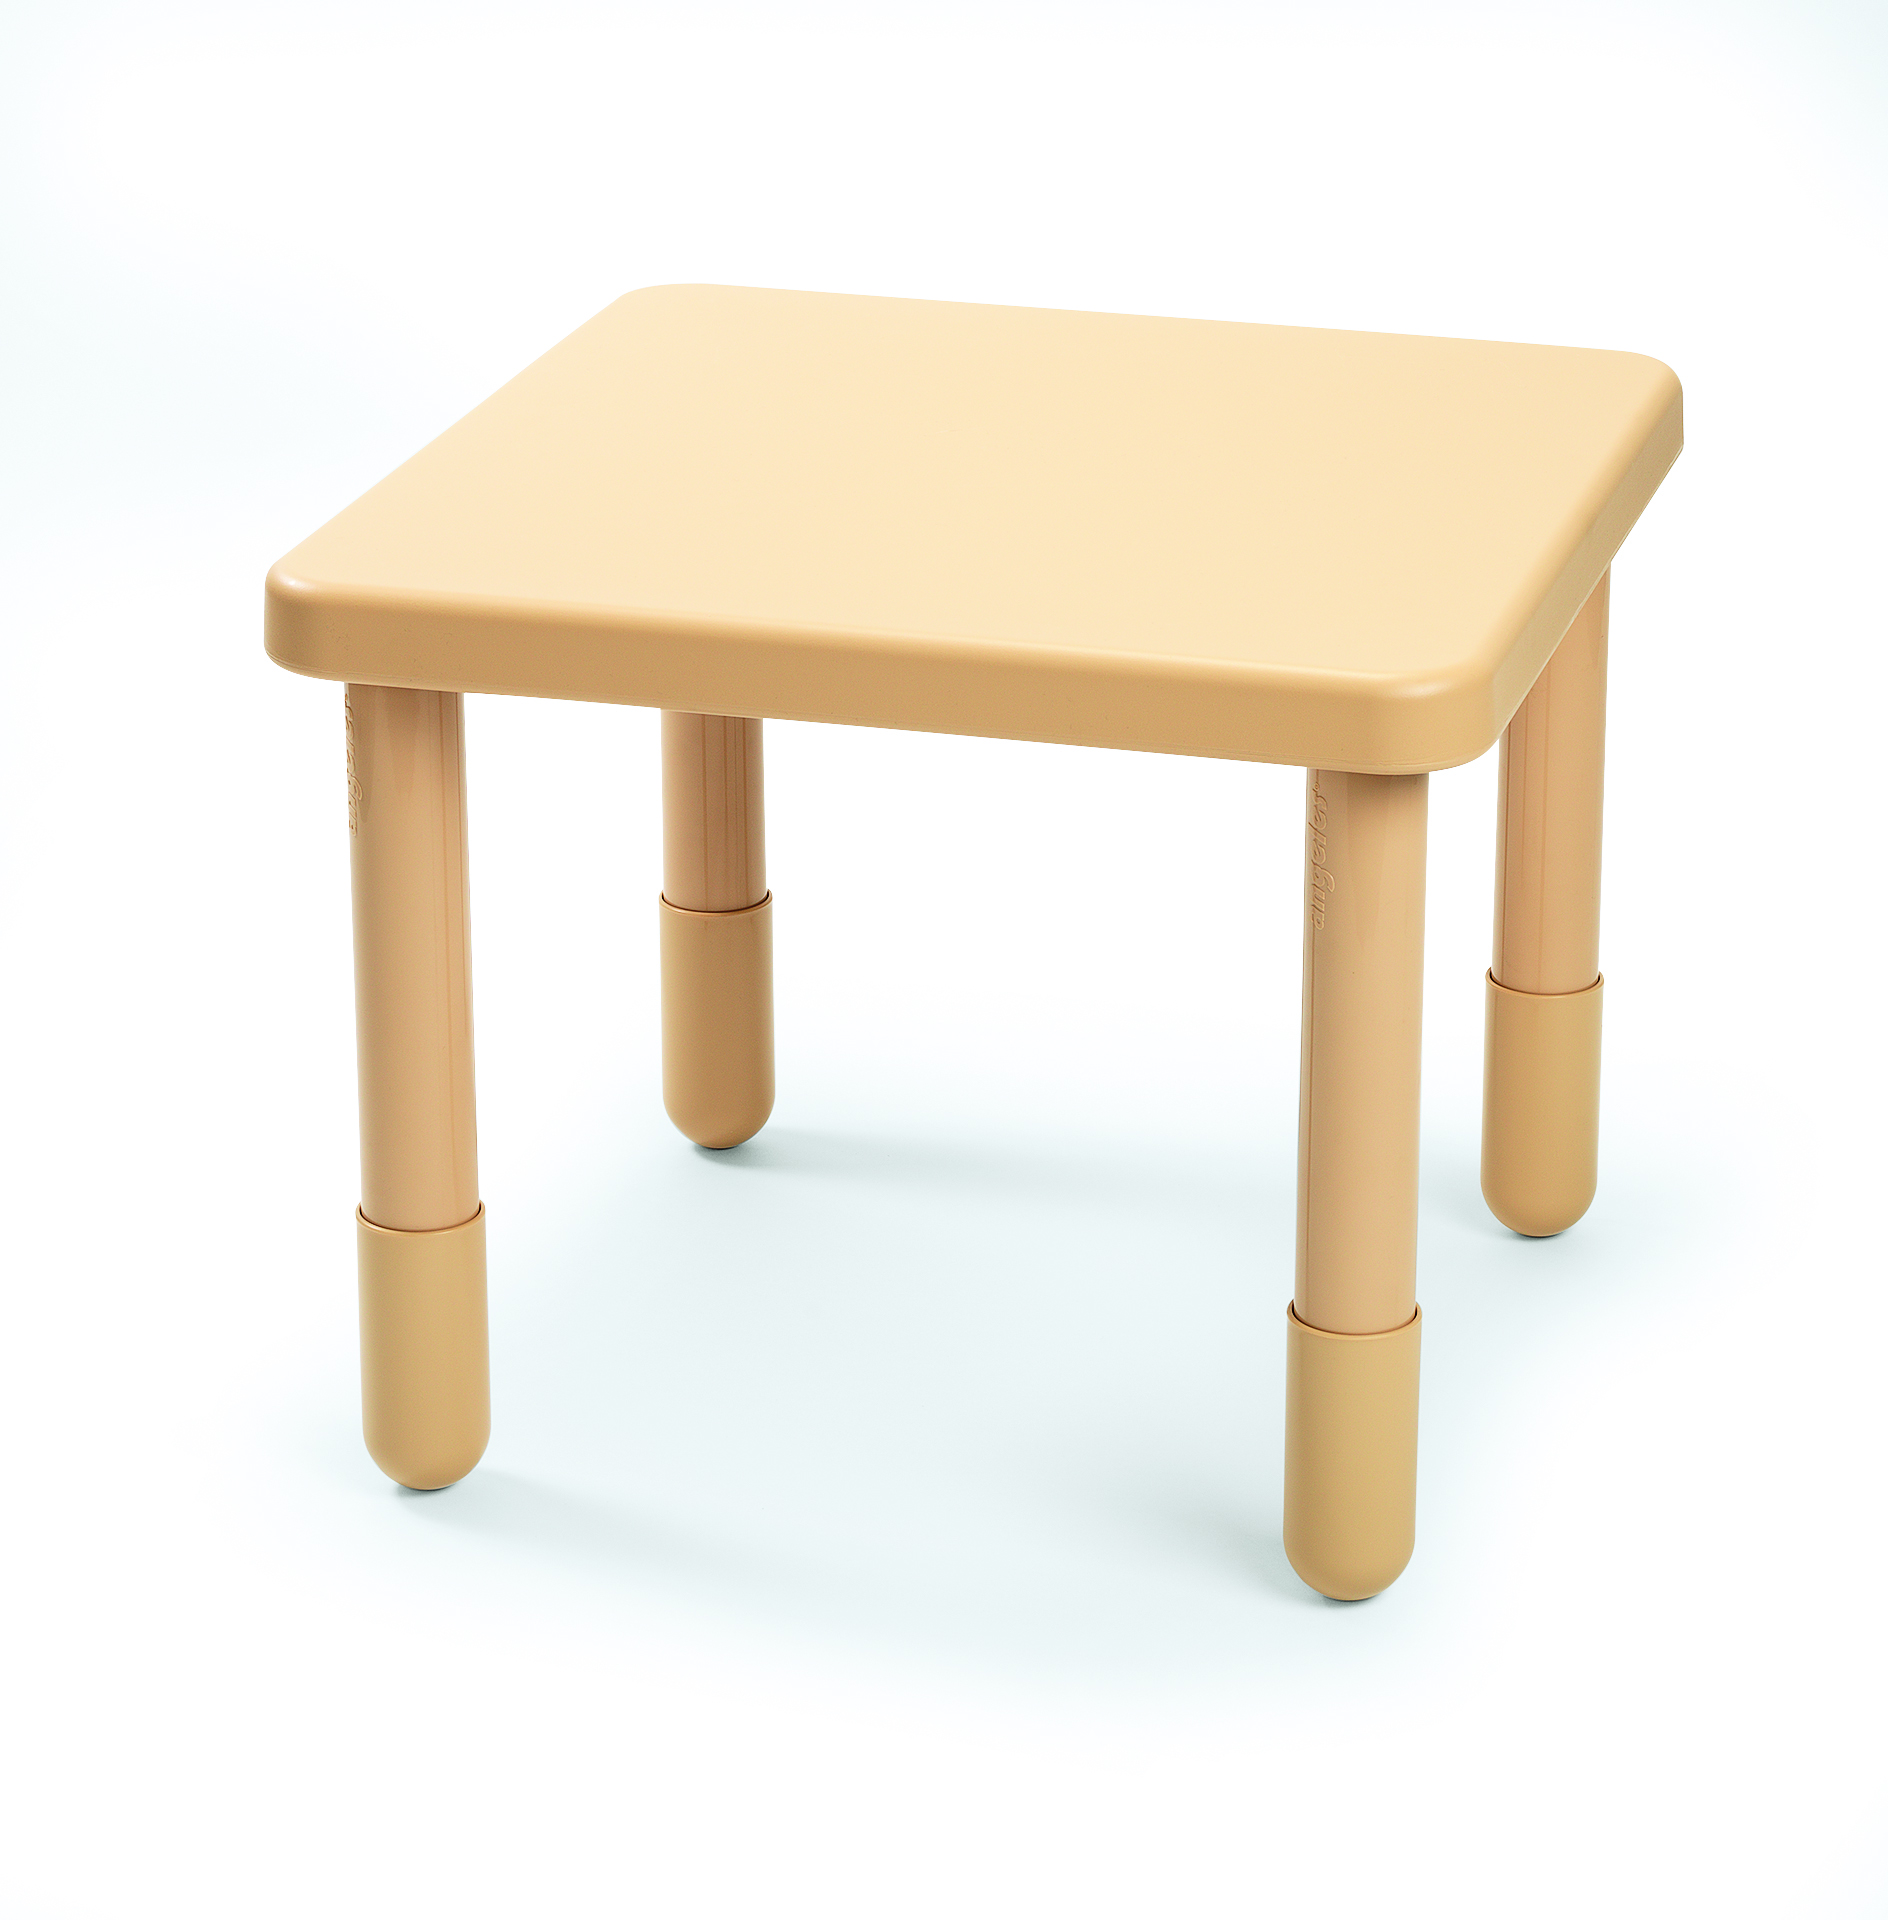 Value 71 cm  Square Table - Natural Tan with 51 cm  Legs